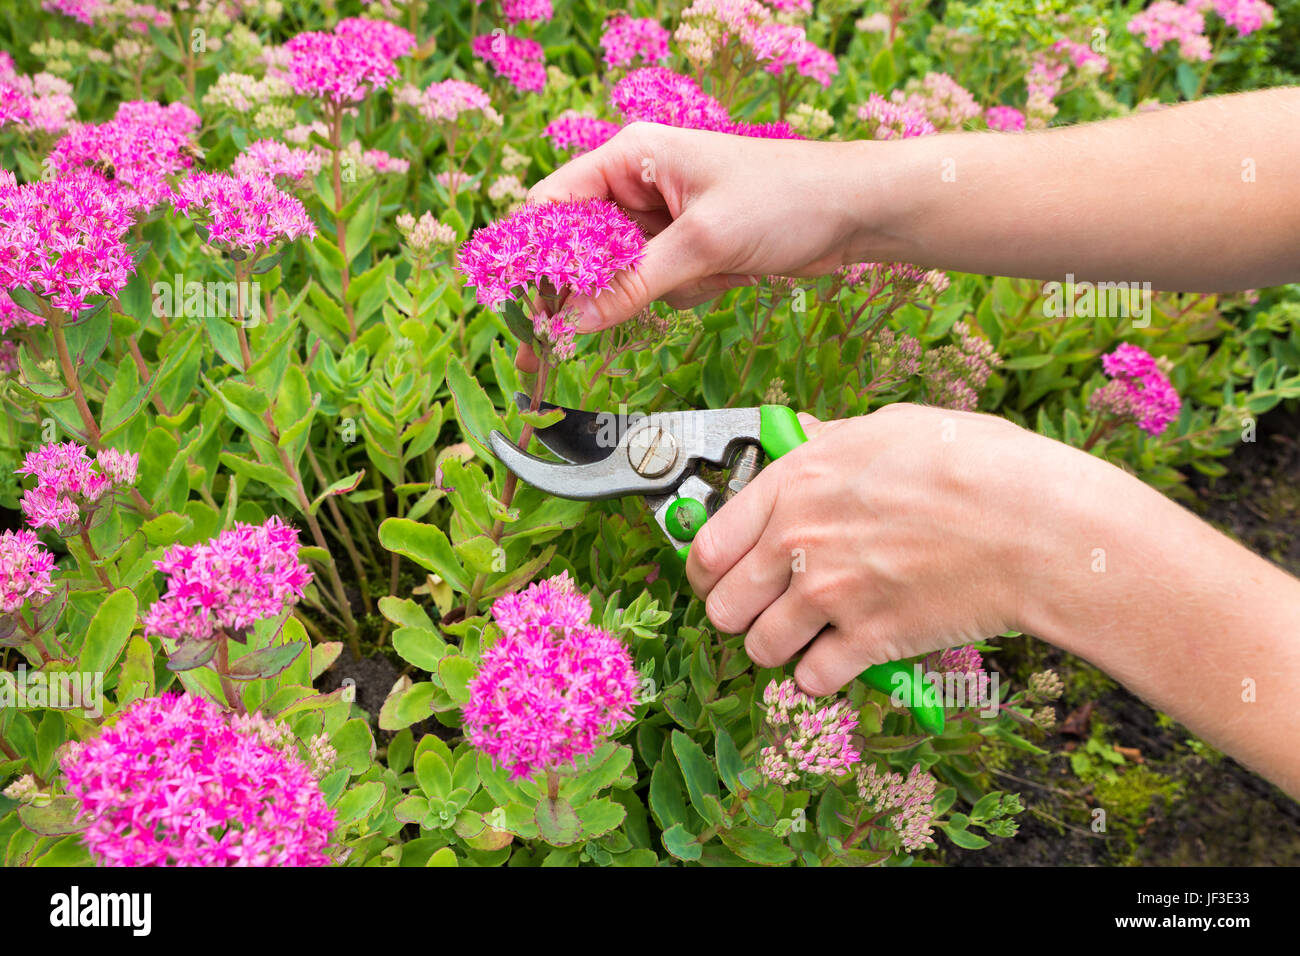 Two arms cutting flower with pruning shears Stock Photo